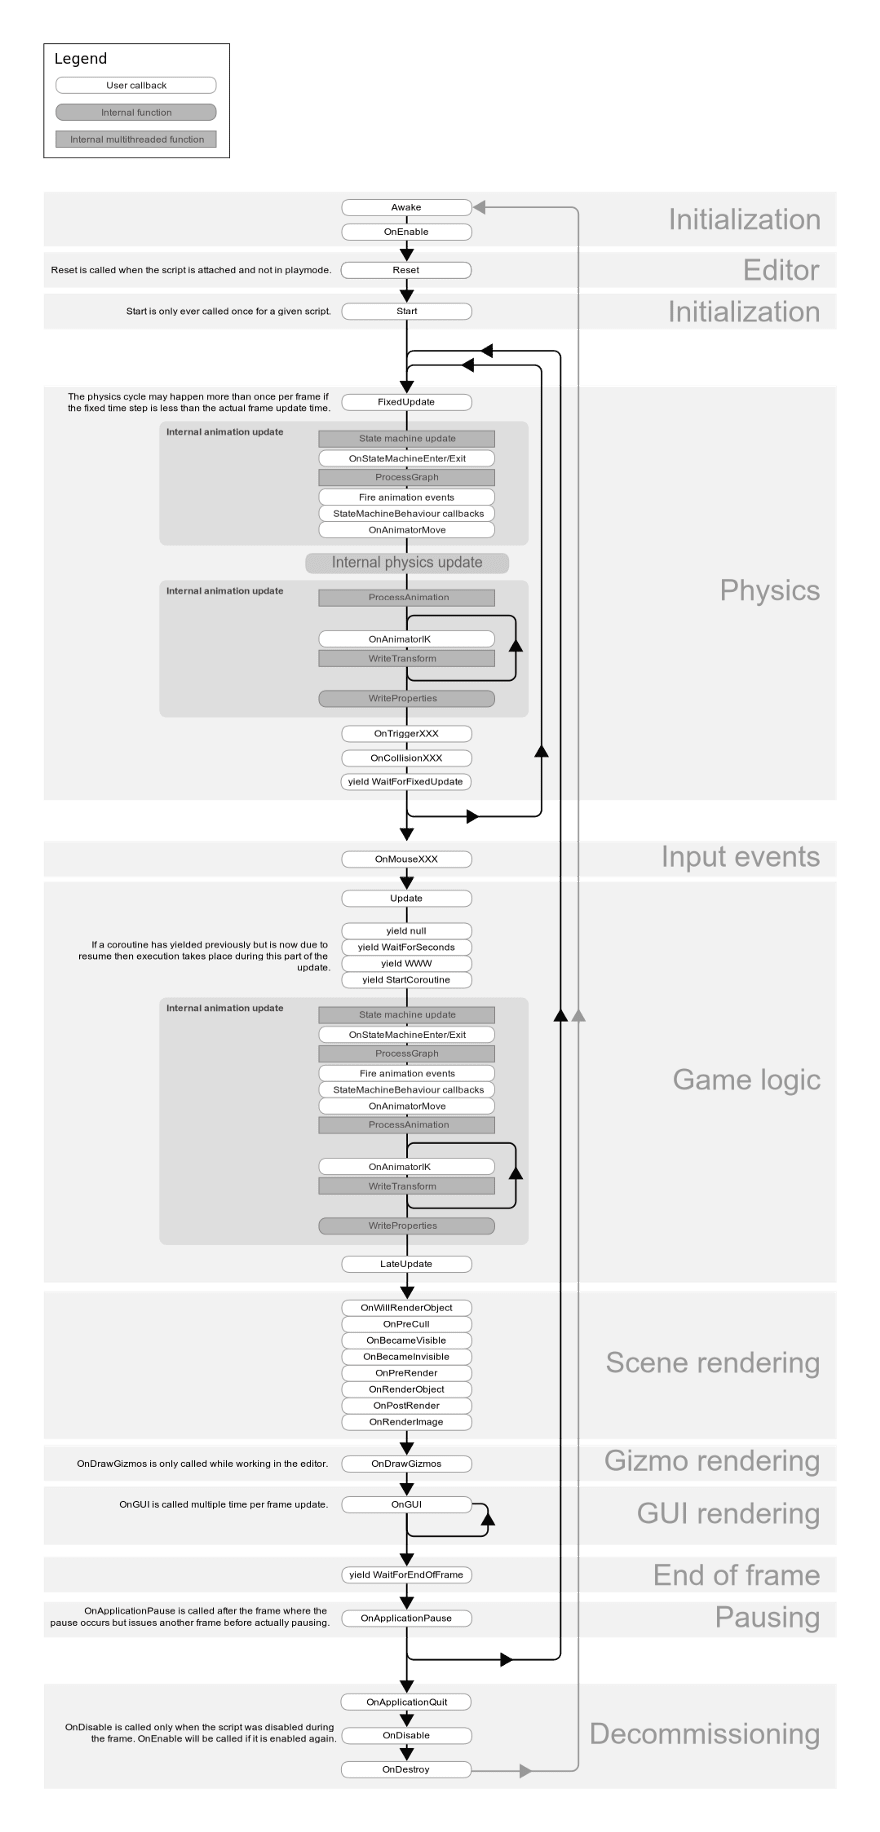 Script lifecycle overview